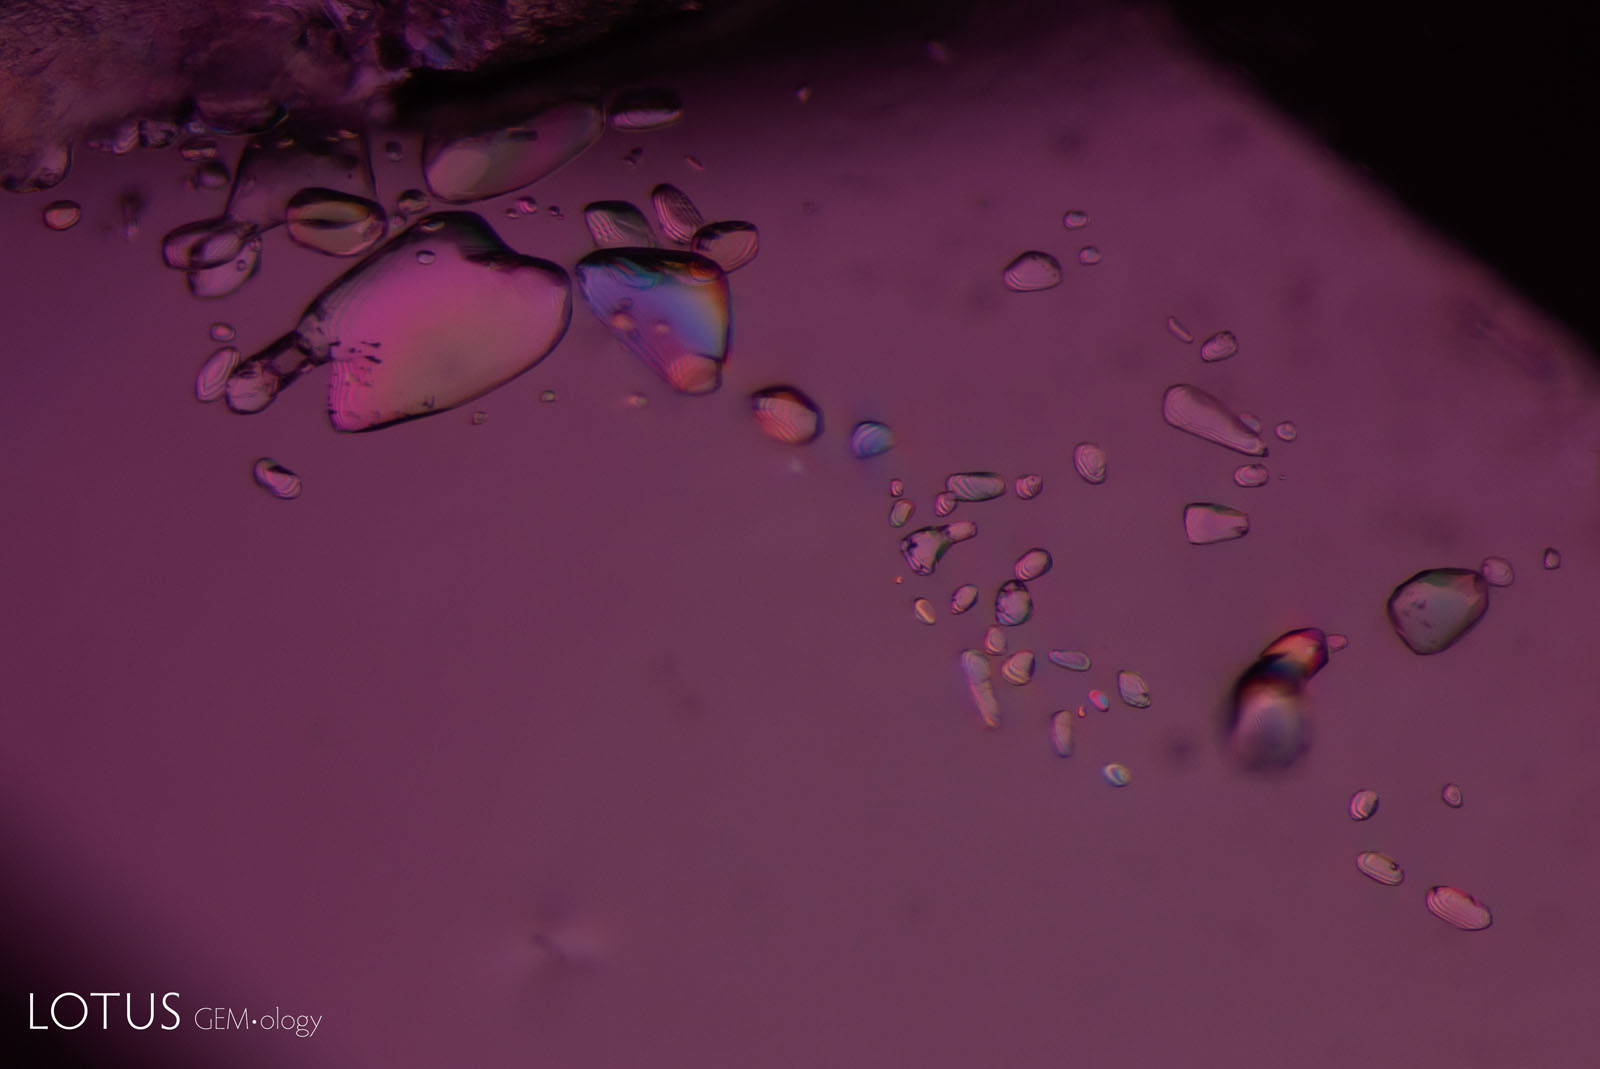 Between crossed polarizers, the same crystals display interference colors, suggesting that they are doubly refractive. Micro-Raman analysis identified these as calcite.